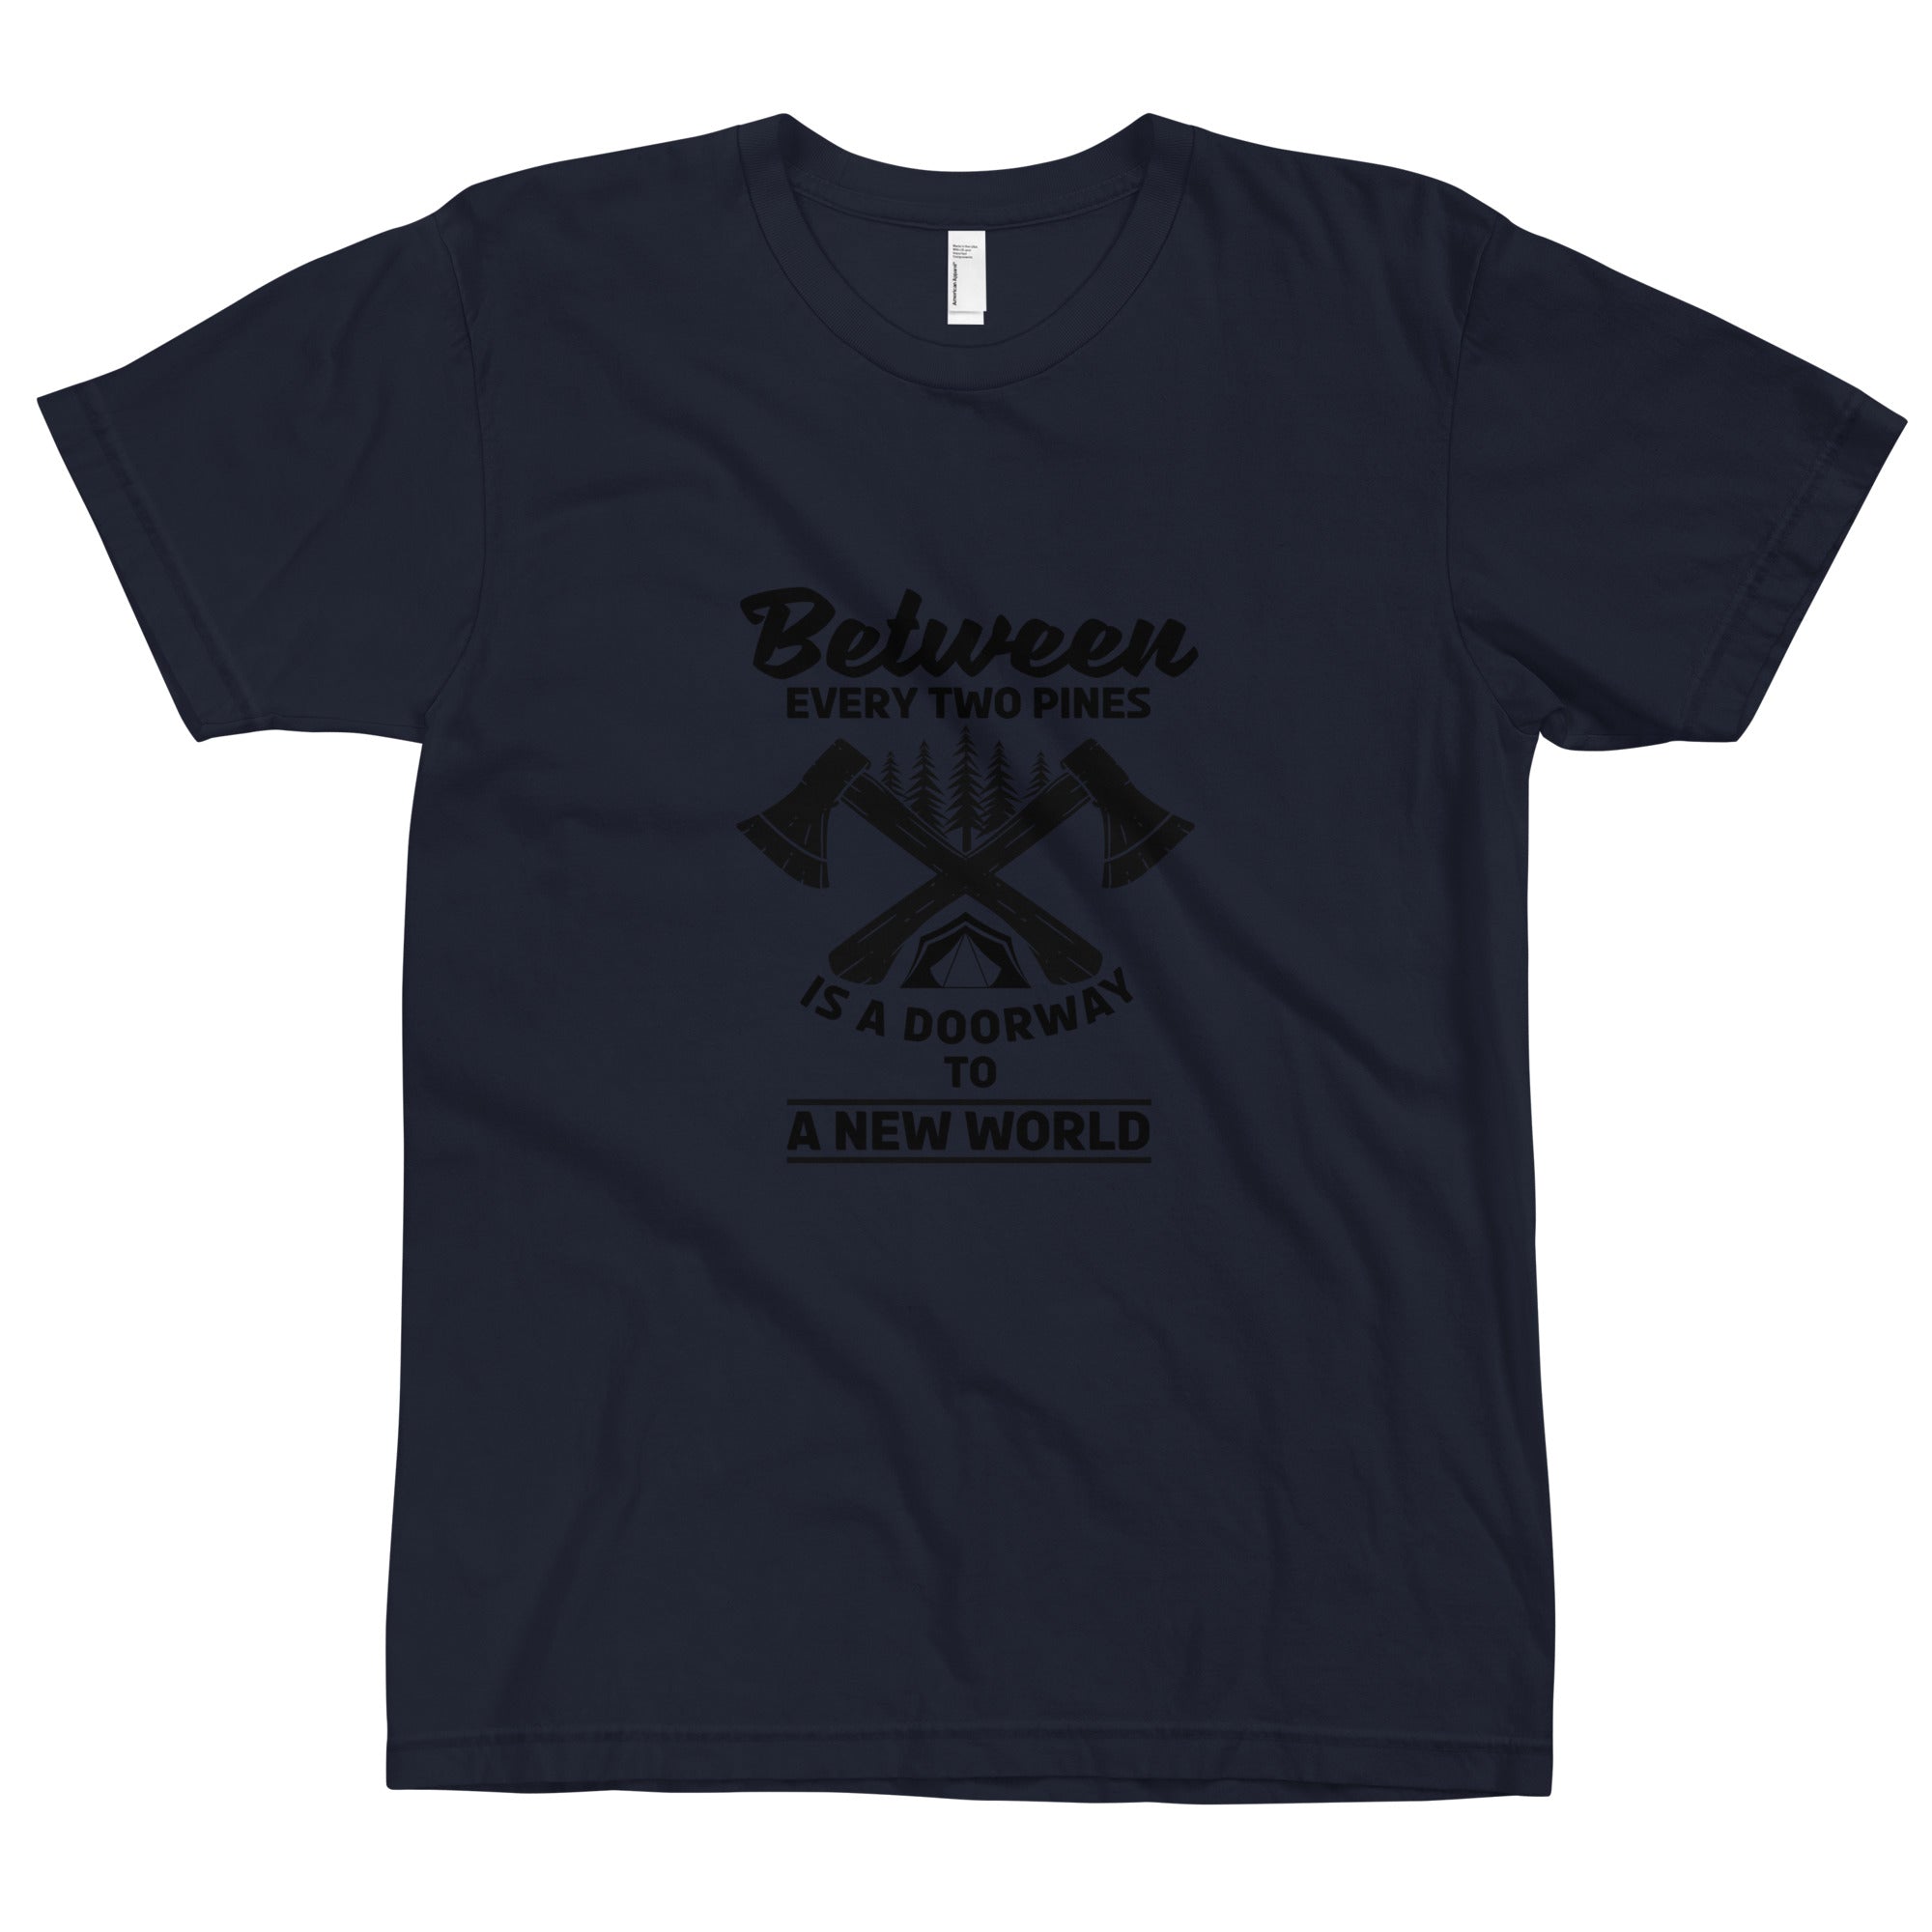 Between Every 2 Pines Unisex T-Shirt